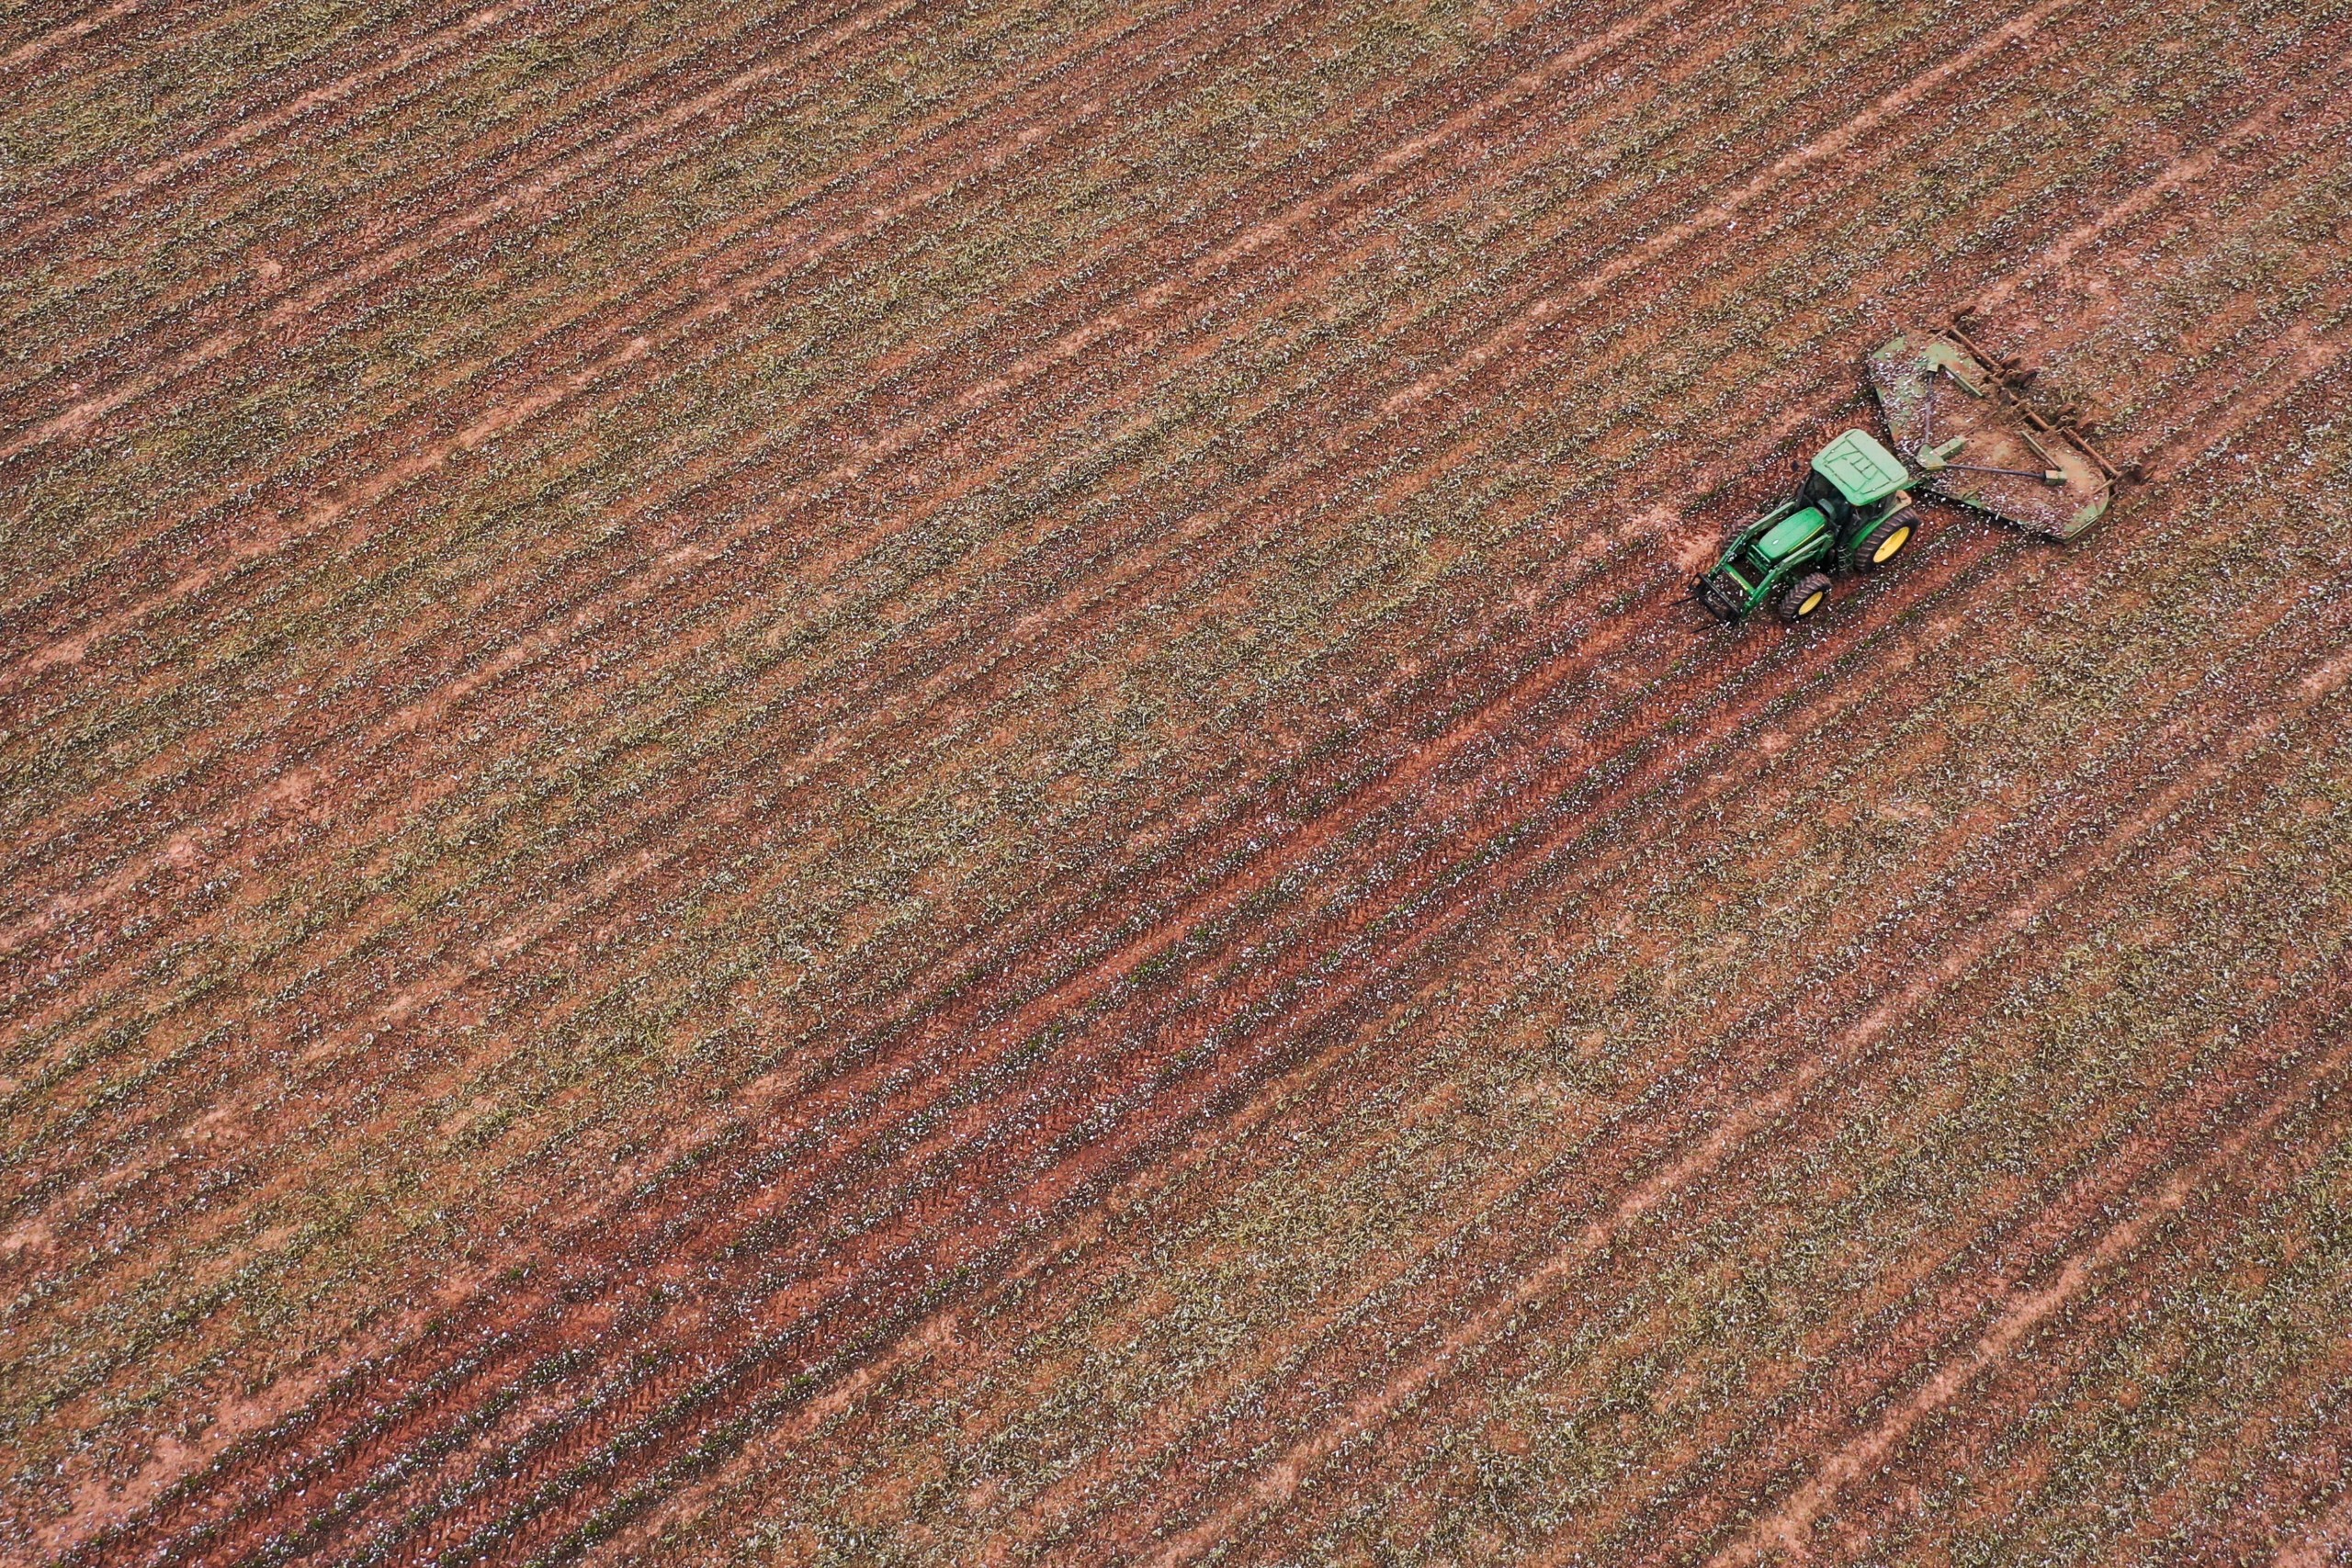 A tractor mows a recently picked cotton field